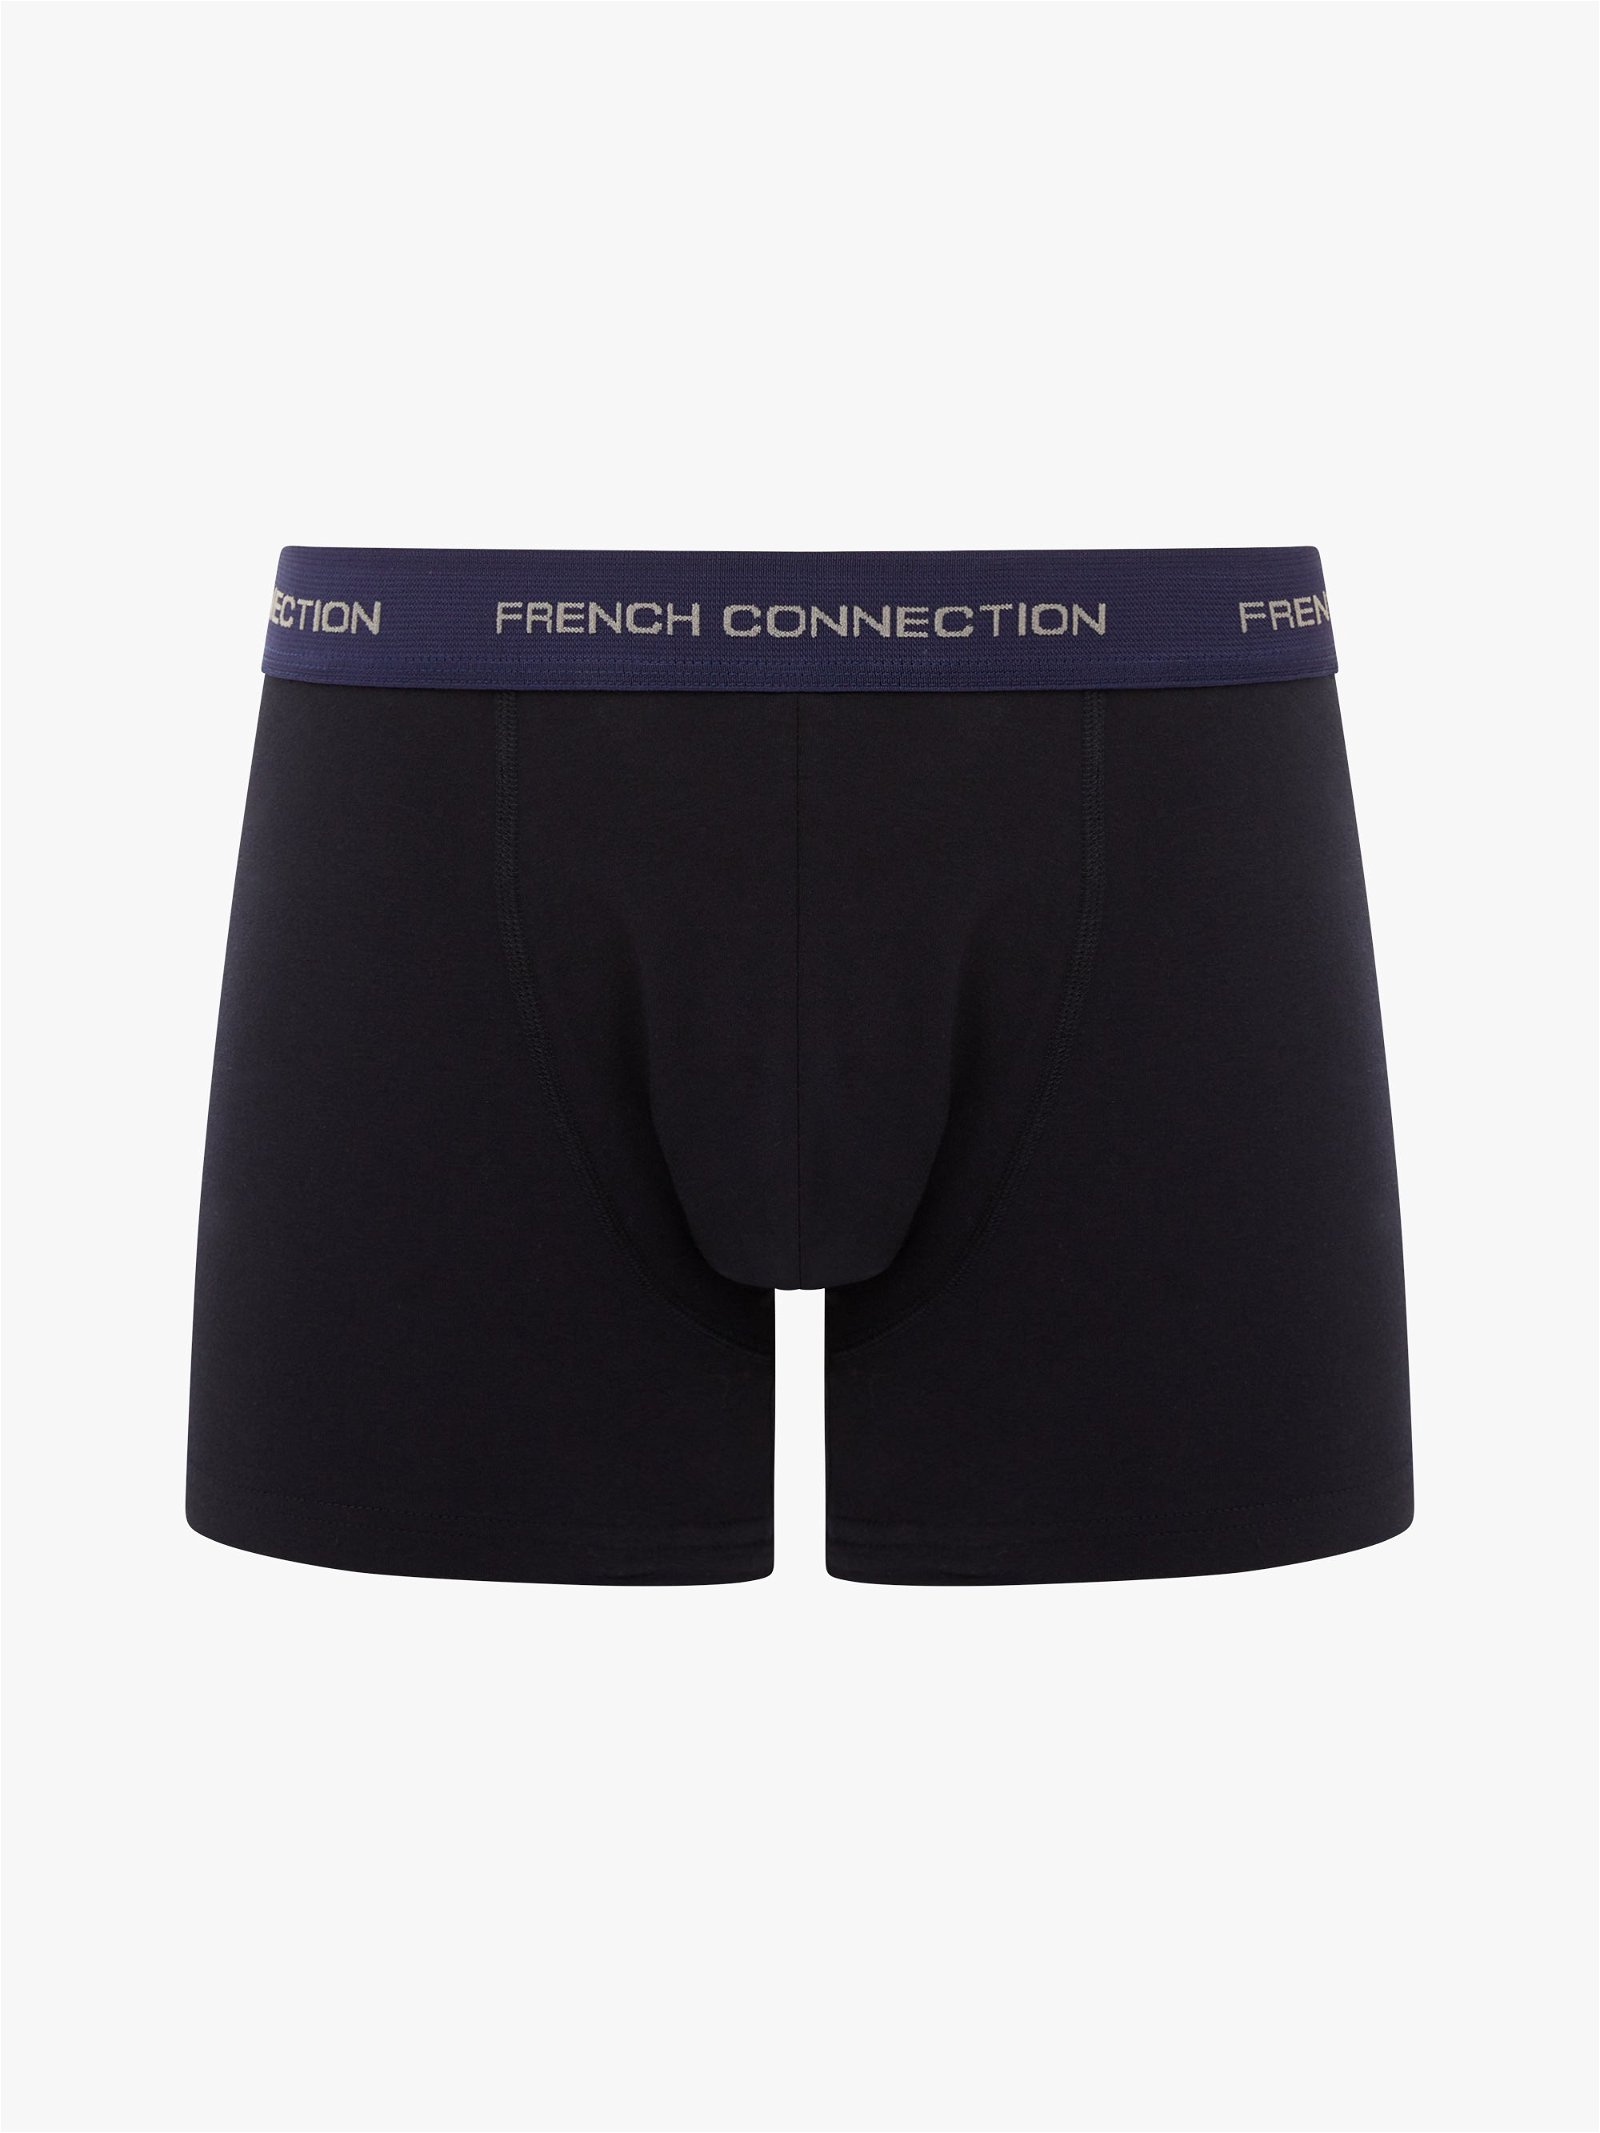 FRENCH CONNECTION 3 Pack Boxers in Dark Navy